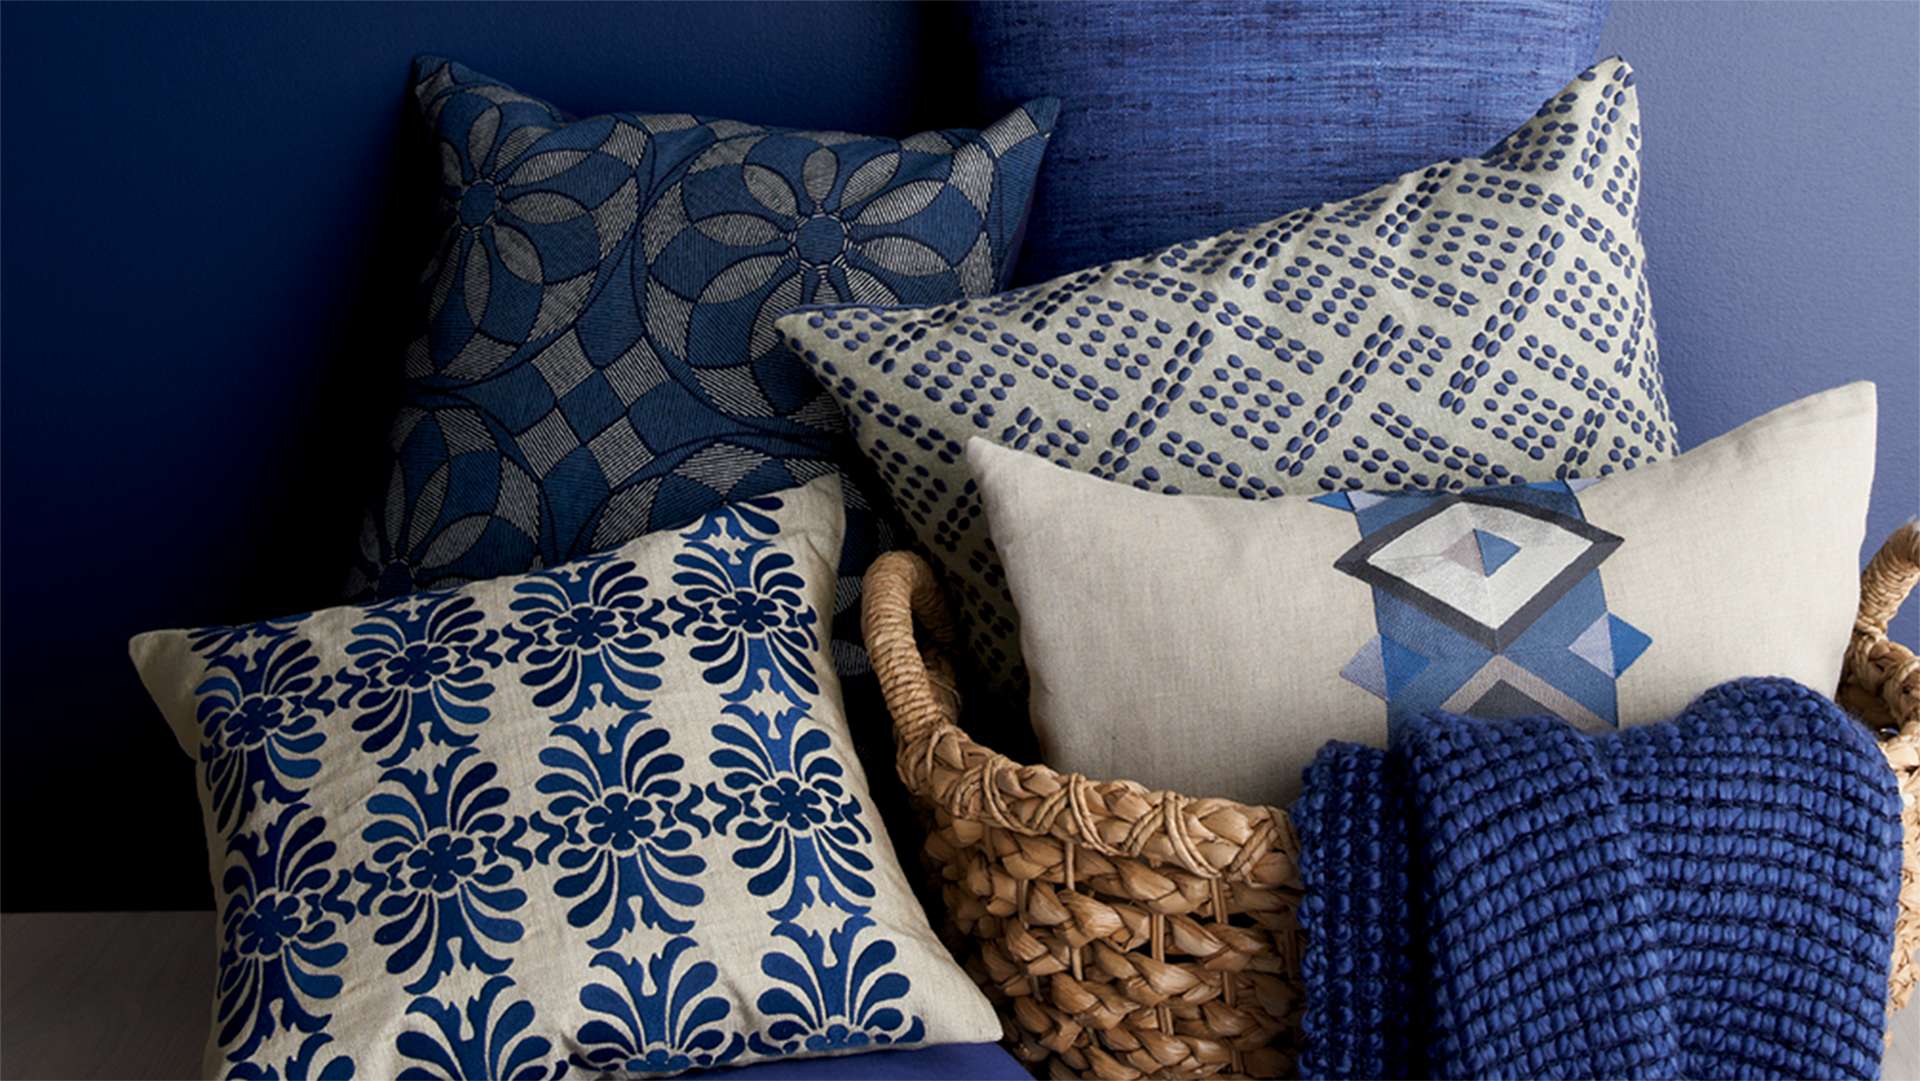 Blue pillows and throws in a basket